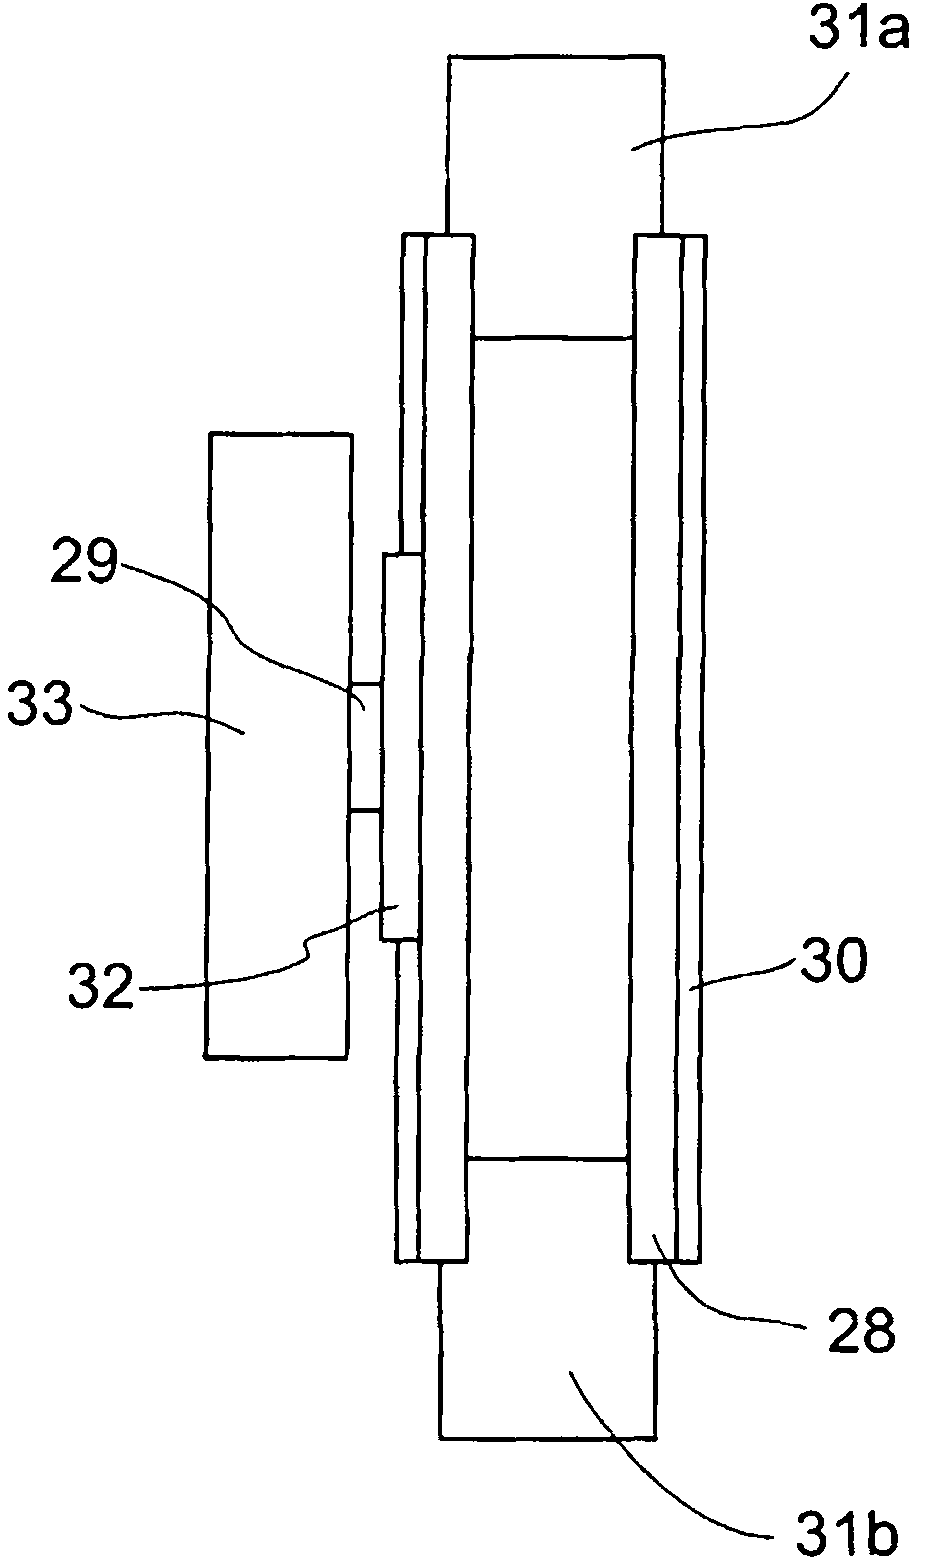 Device on carding machine having cylinders, working elements and adjustable holding elements